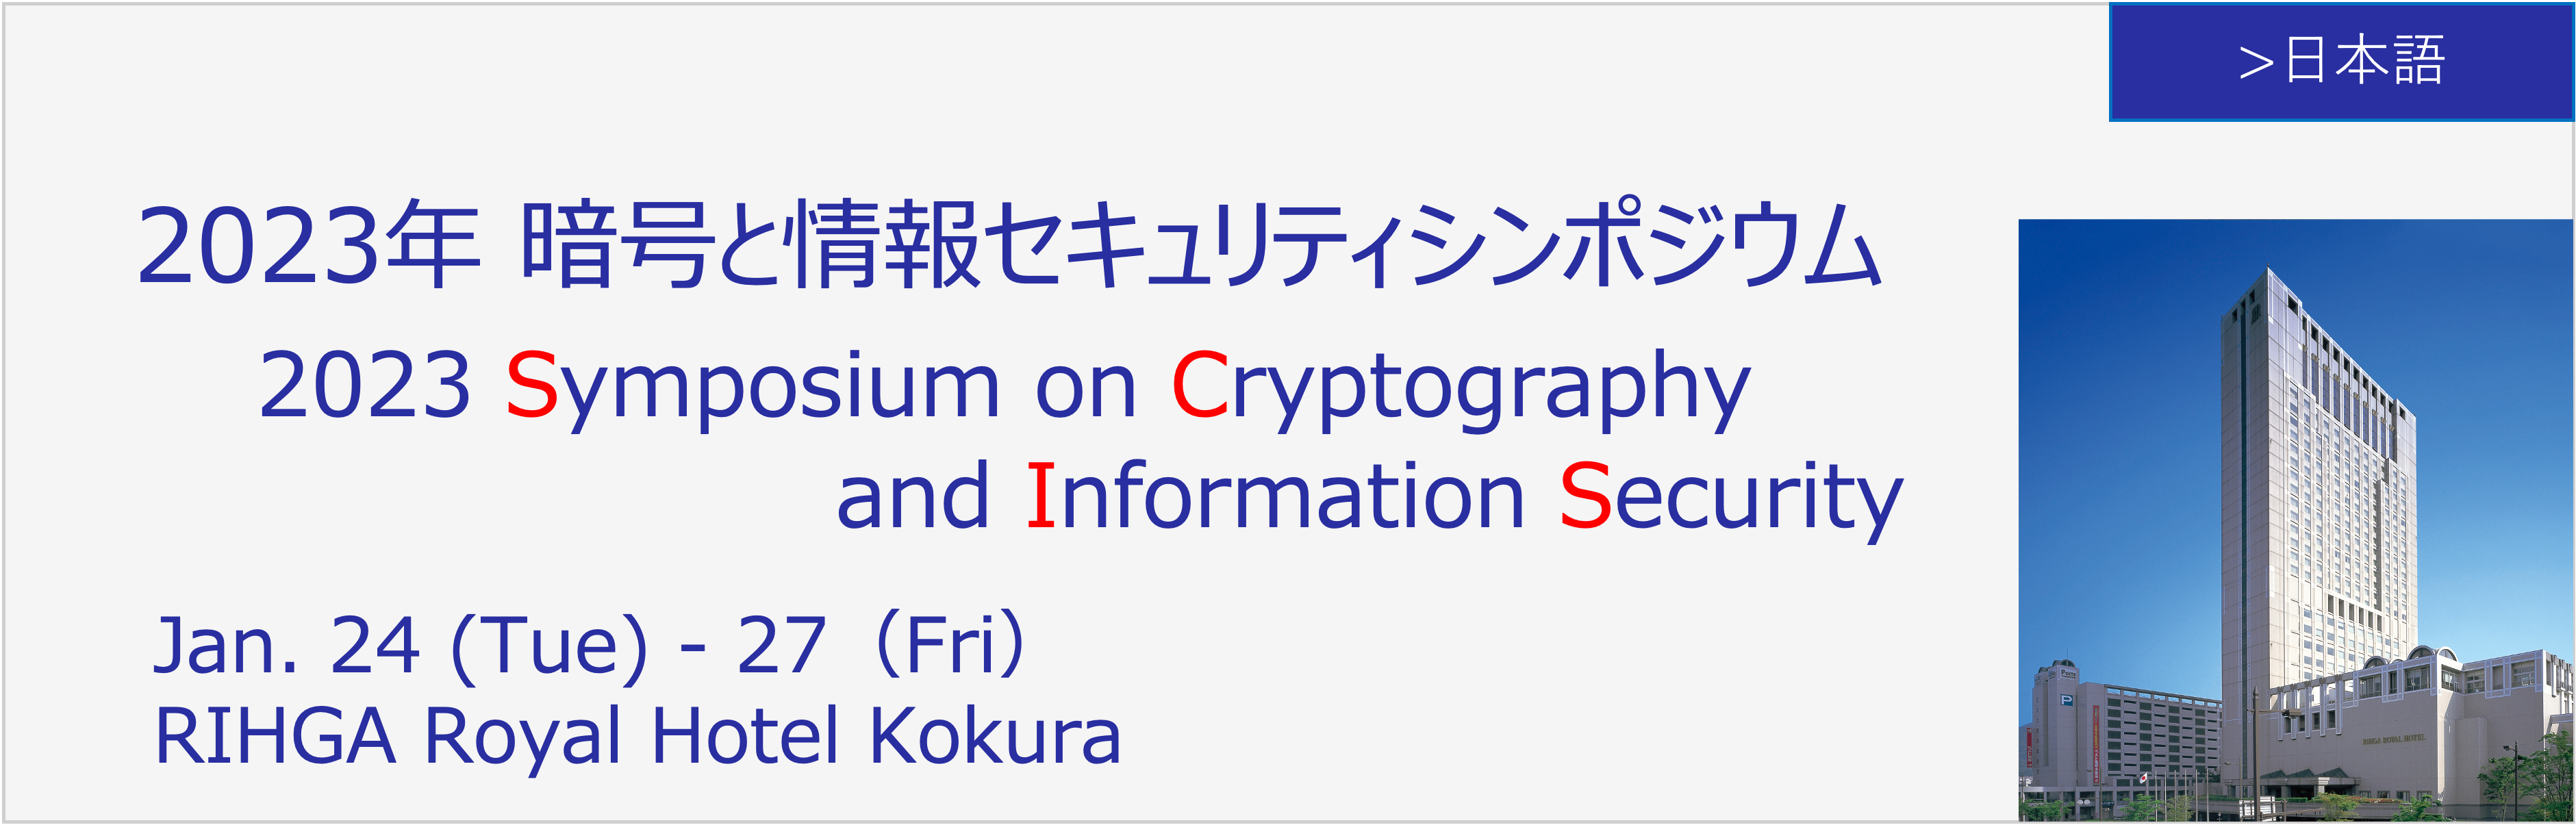 SCIS2023 2023 Symposium on Cryptography and Information Security